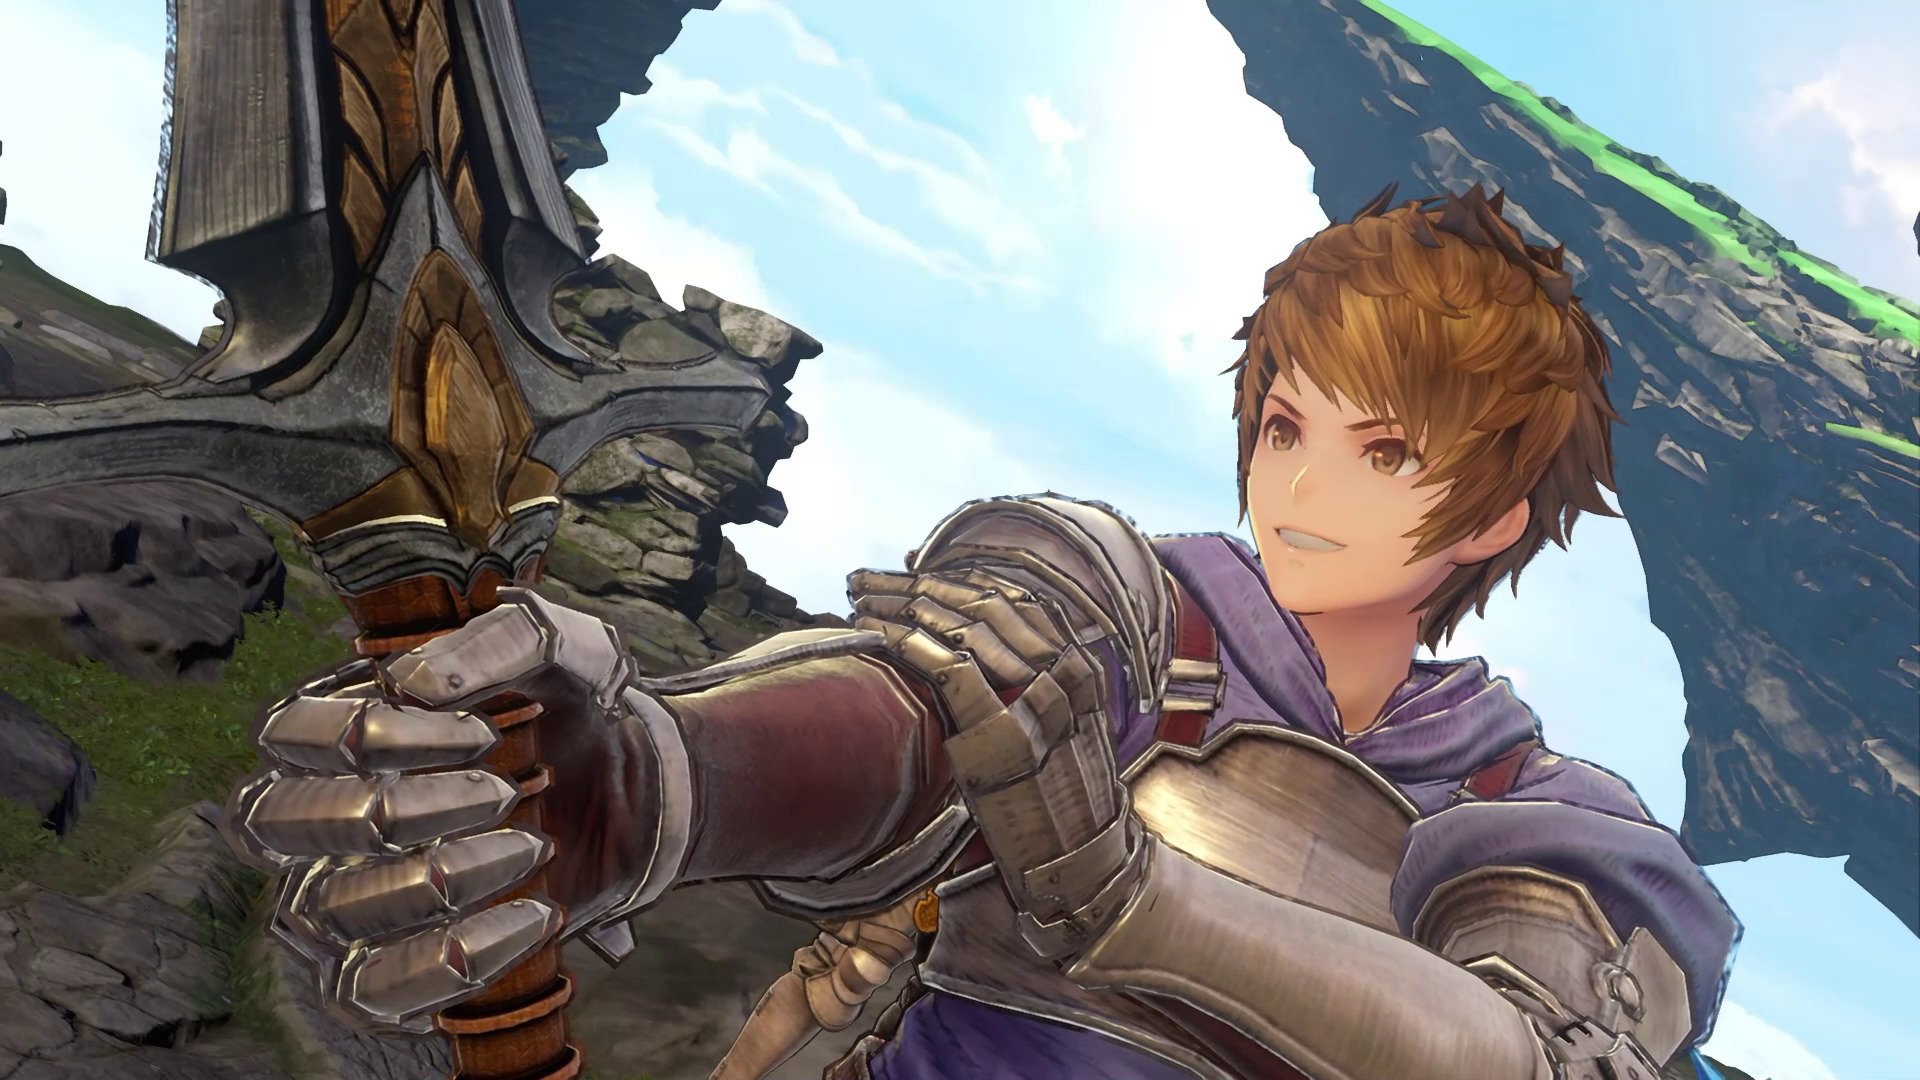 Granblue Fantasy Relink Hands-On Preview (PS5) - Cygames' Action